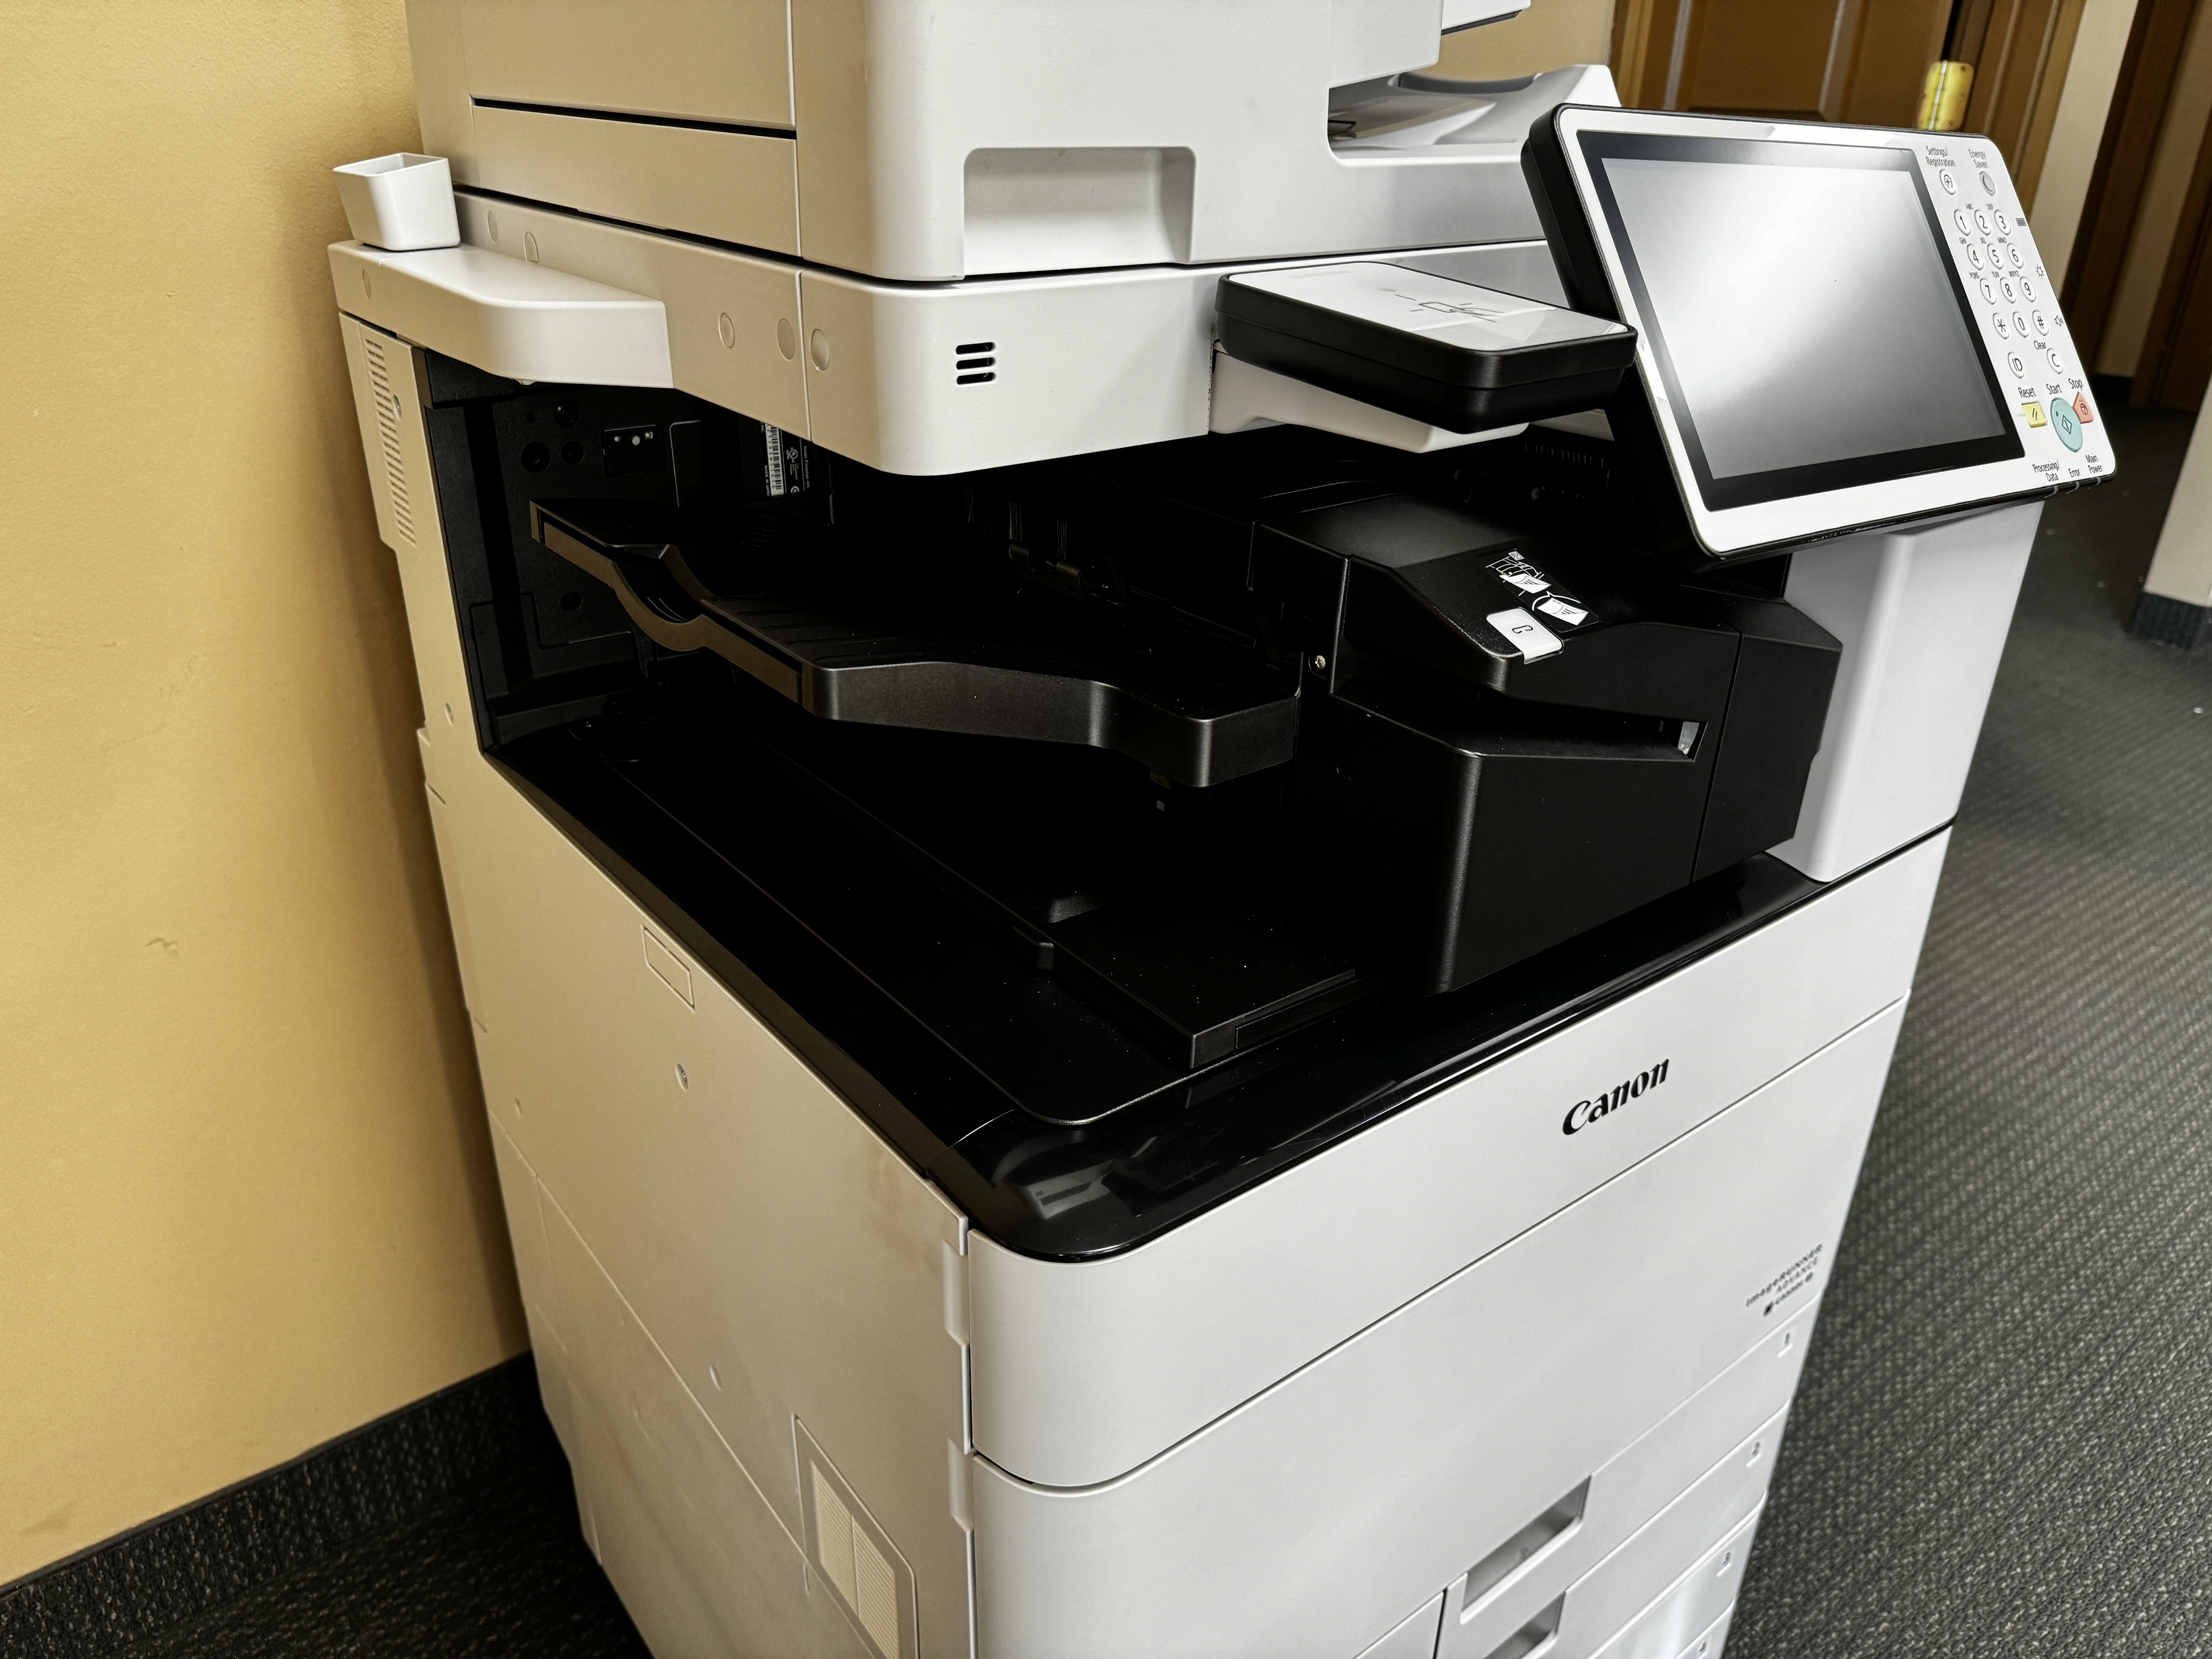 Canon Imagerunner Advance C5550ii color copier model used in copier lease. 